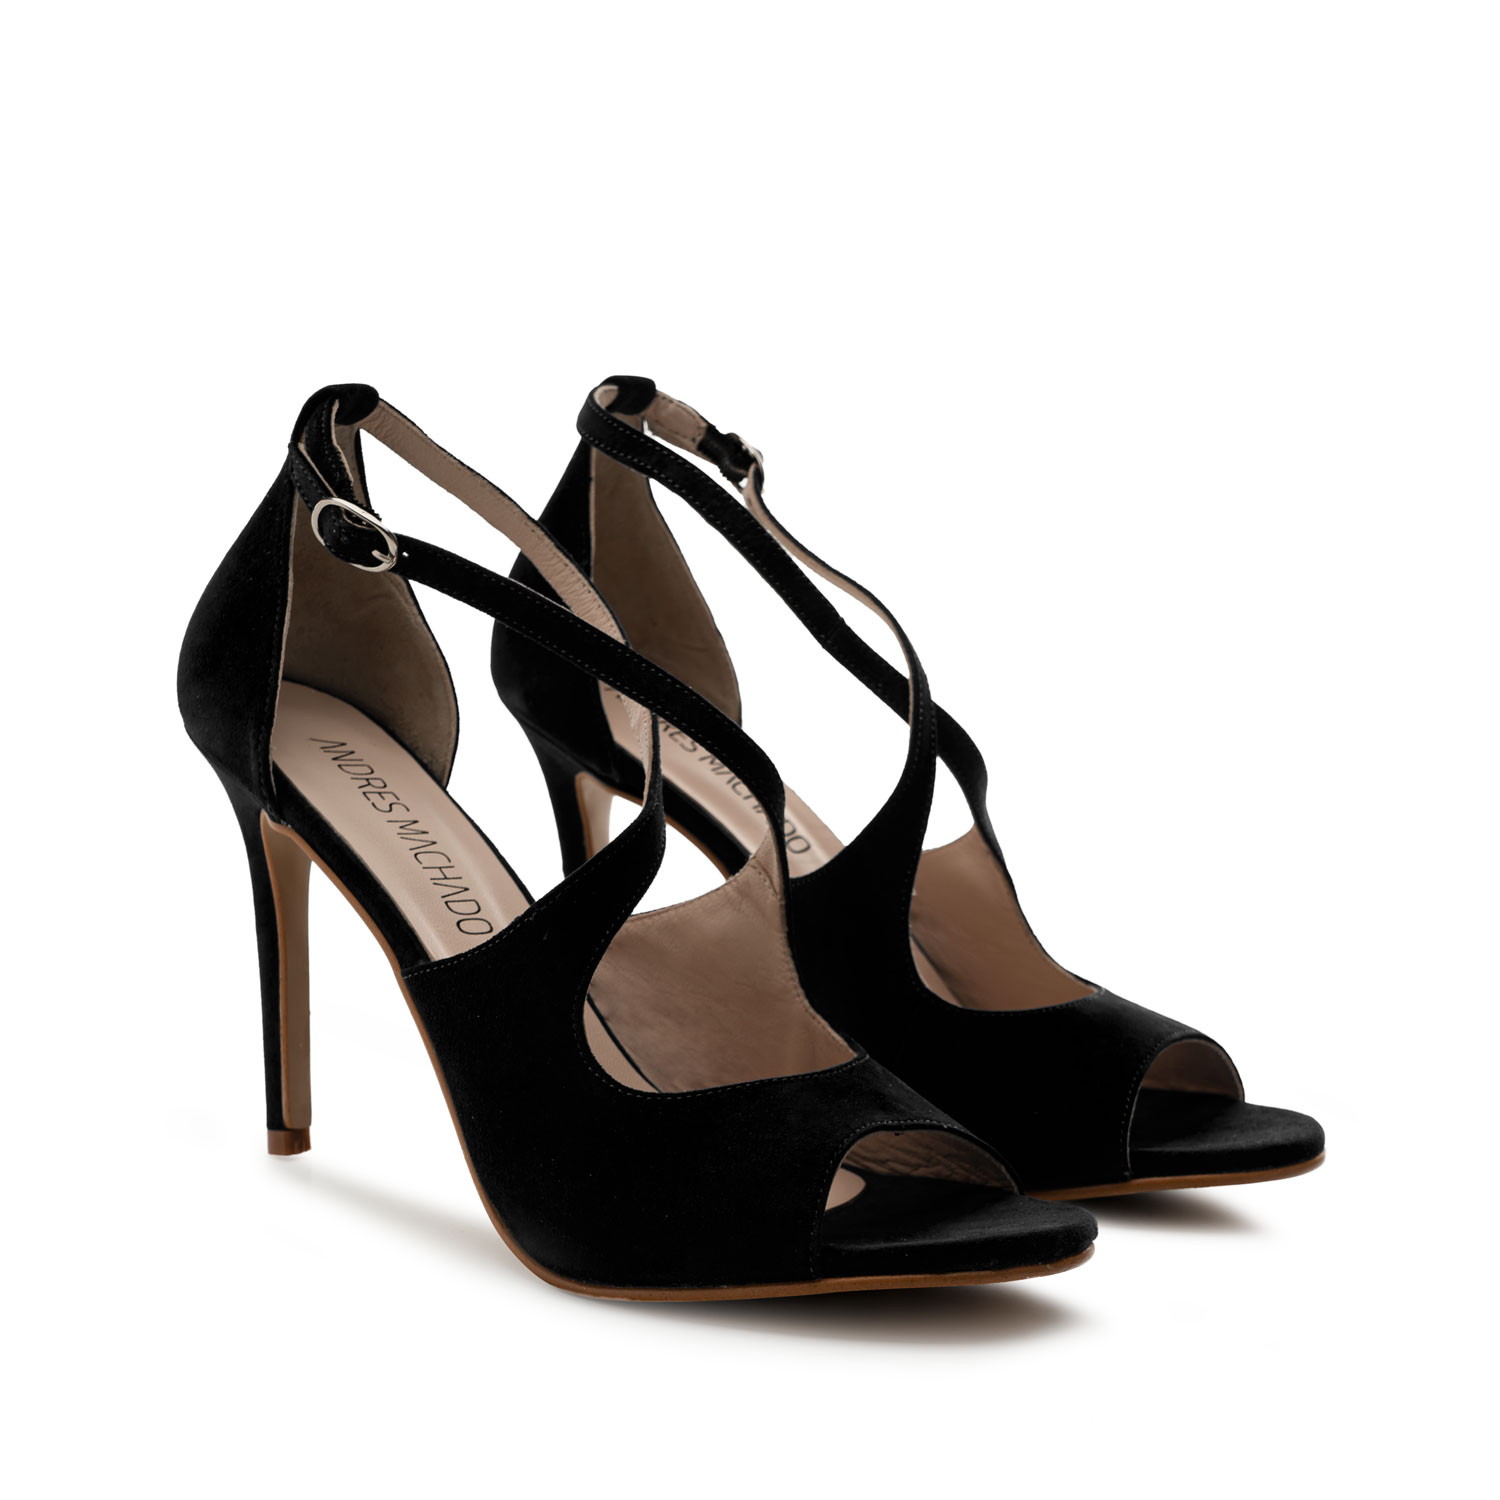 Stiletto Crossed Sandals in Black Suede Leather 